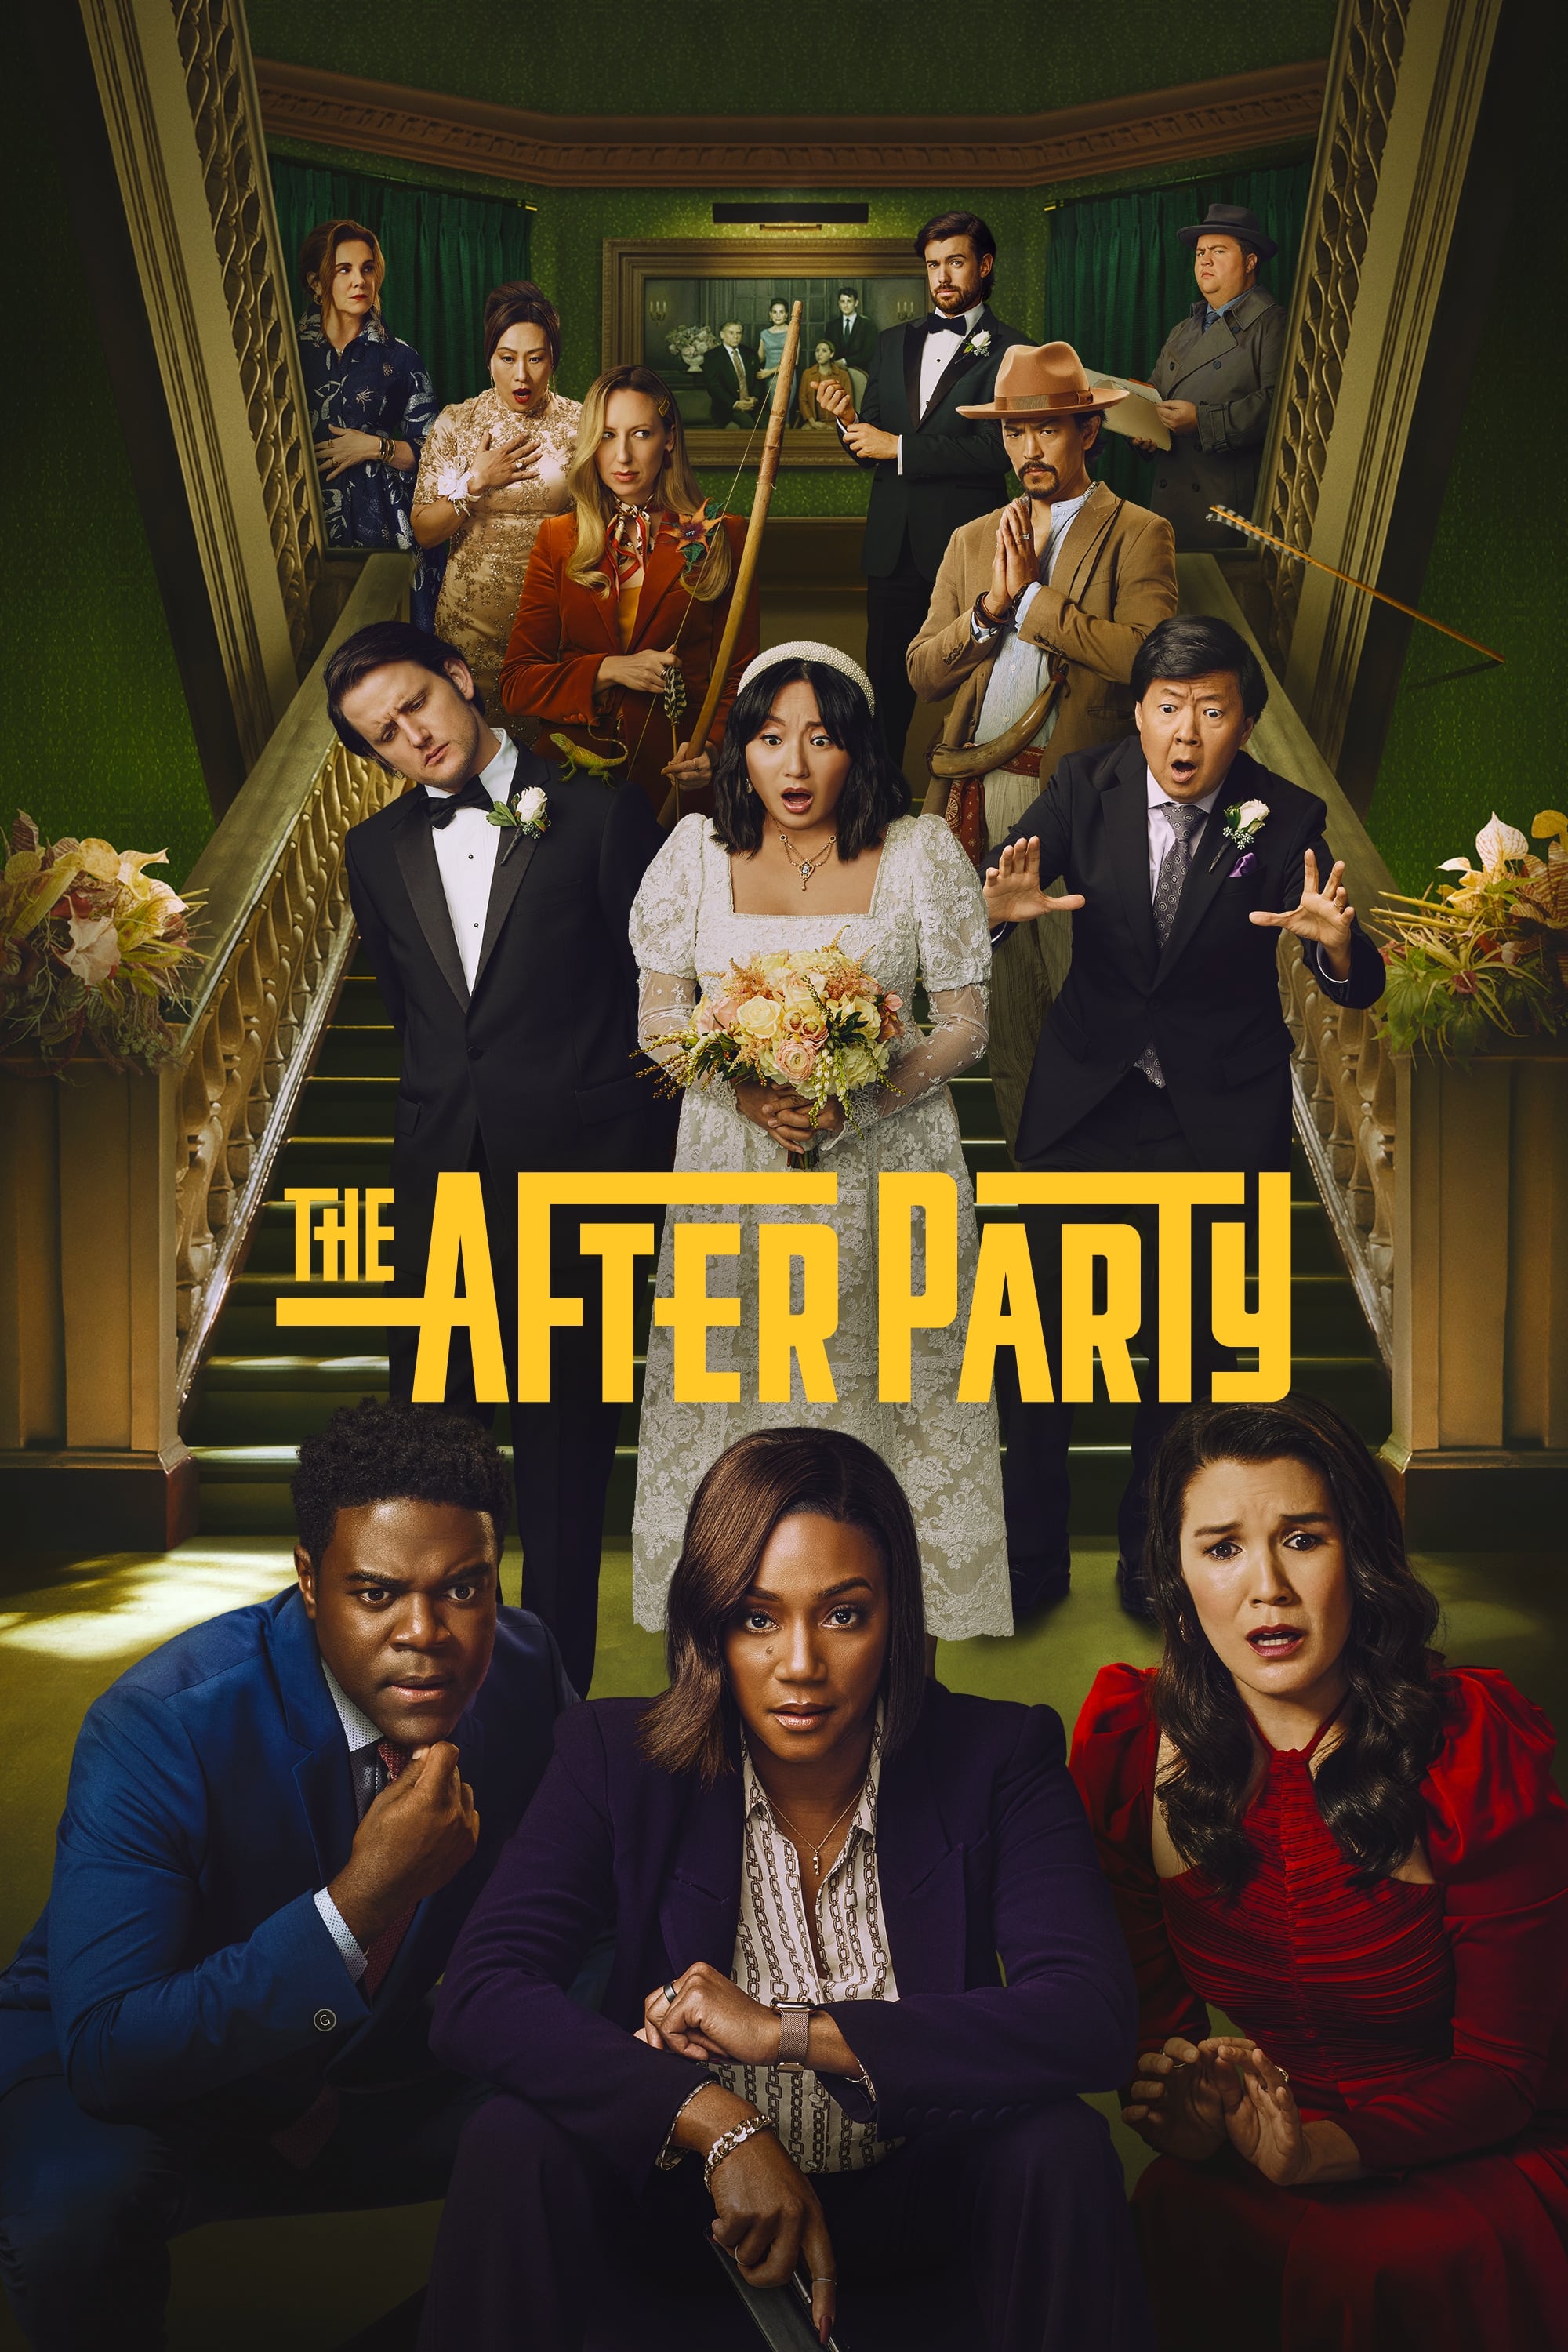 The Afterparty (Season 01) 1080p